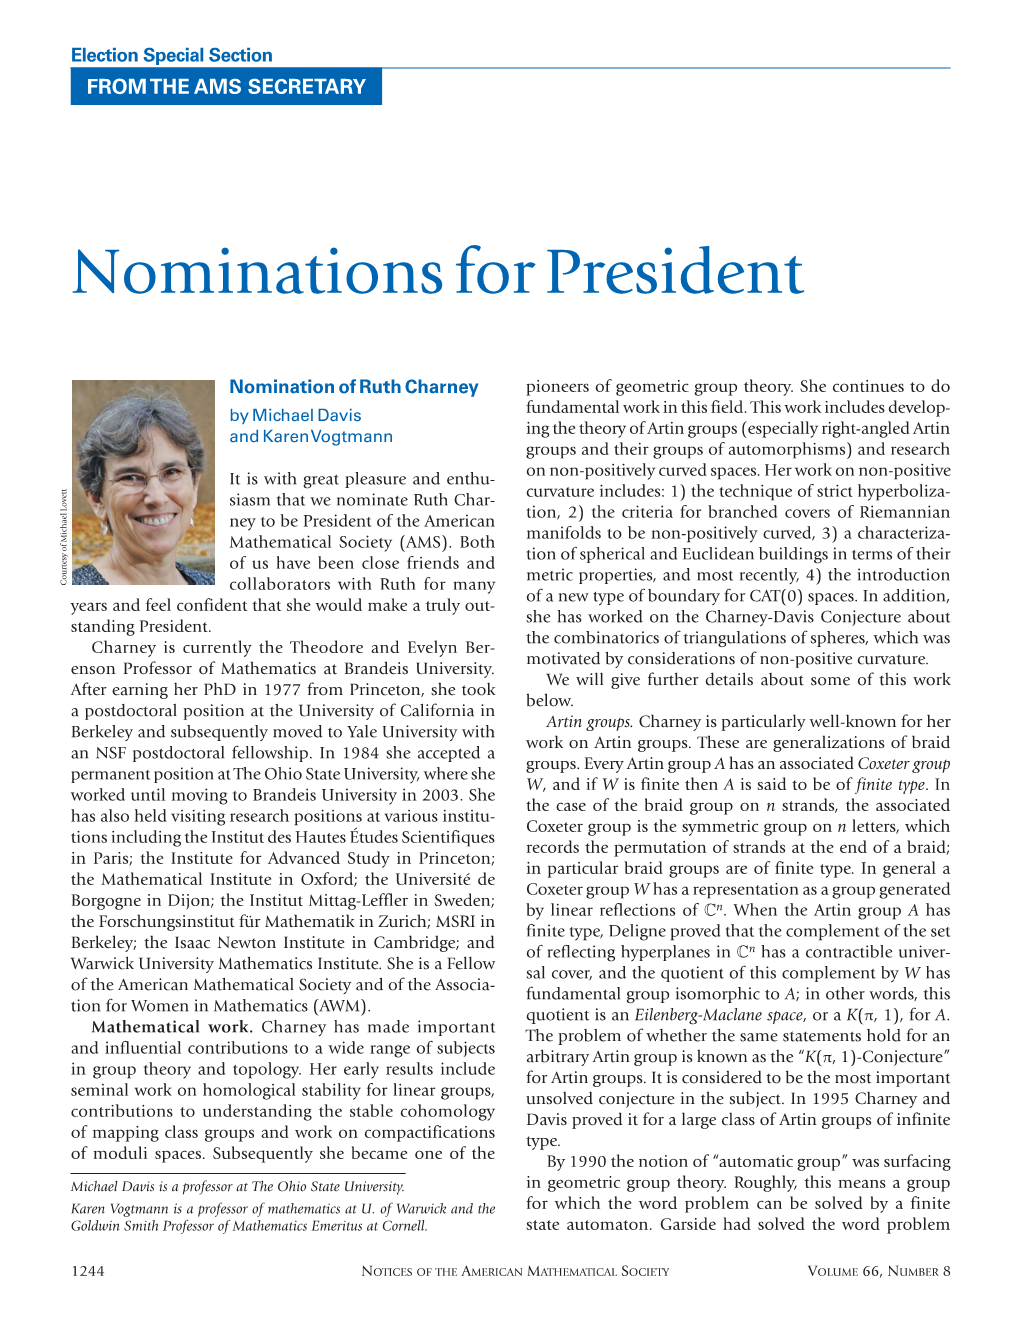 Nominations for President